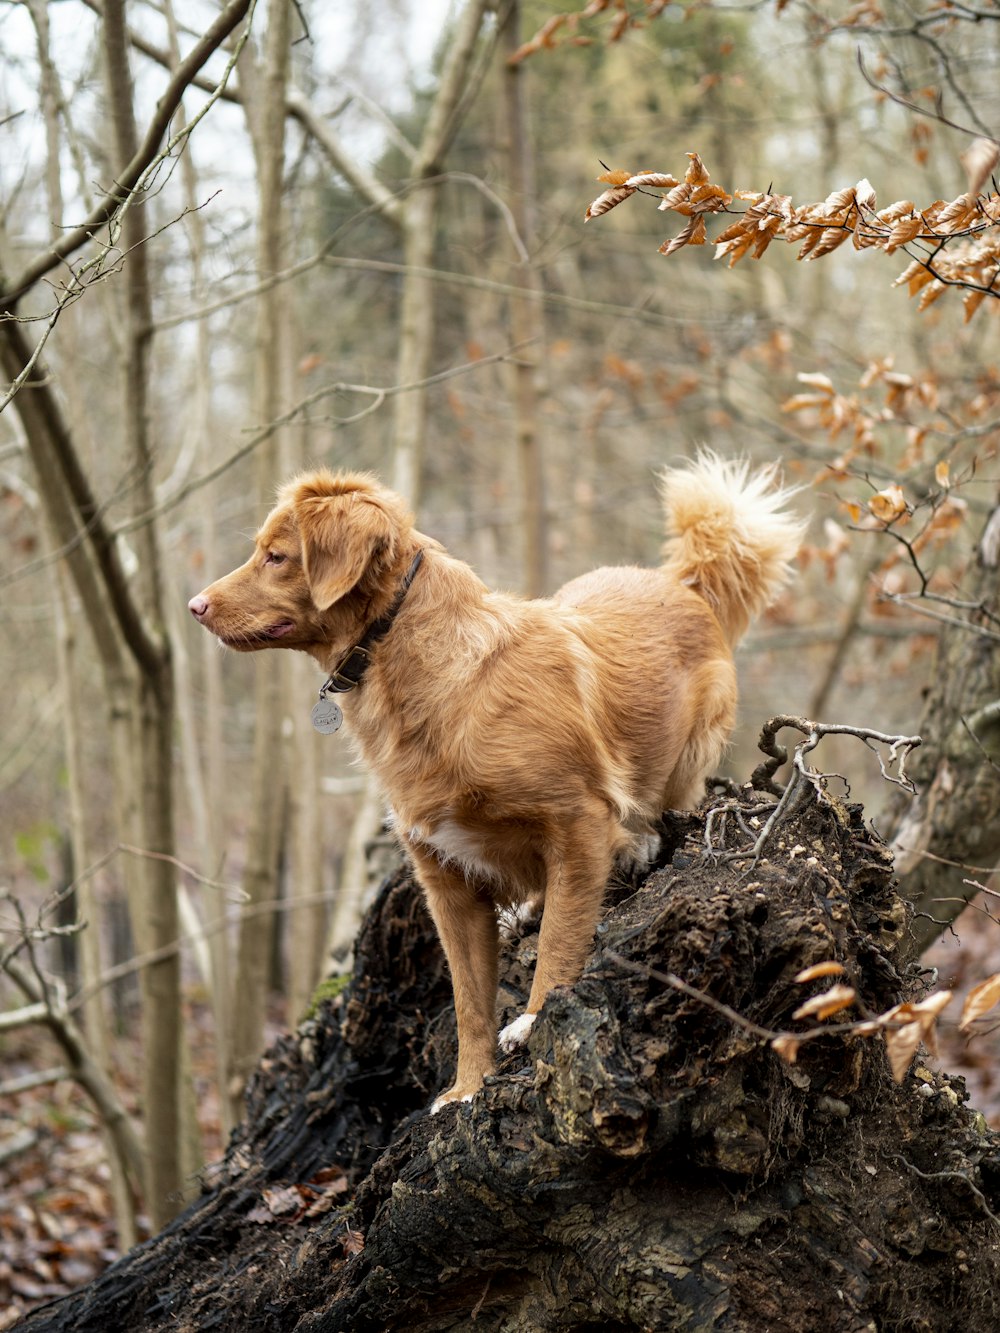 brown short coated medium sized dog on brown tree trunk during daytime